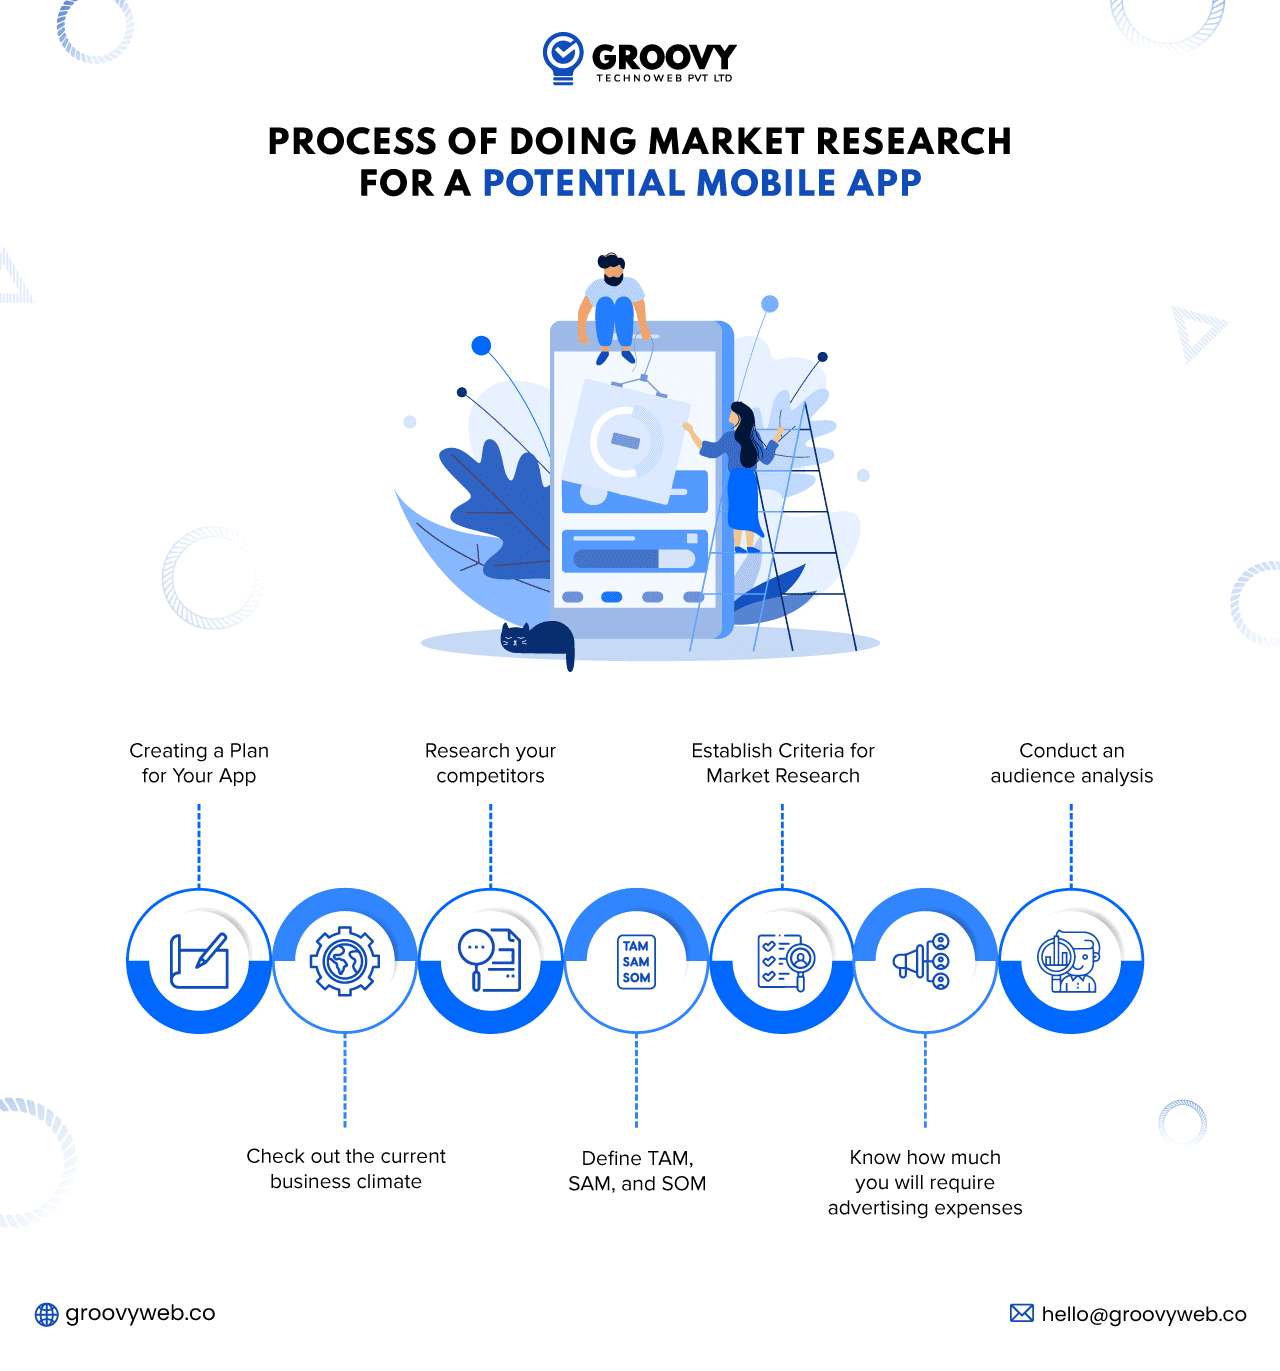 Process of doing market research for your mobile application